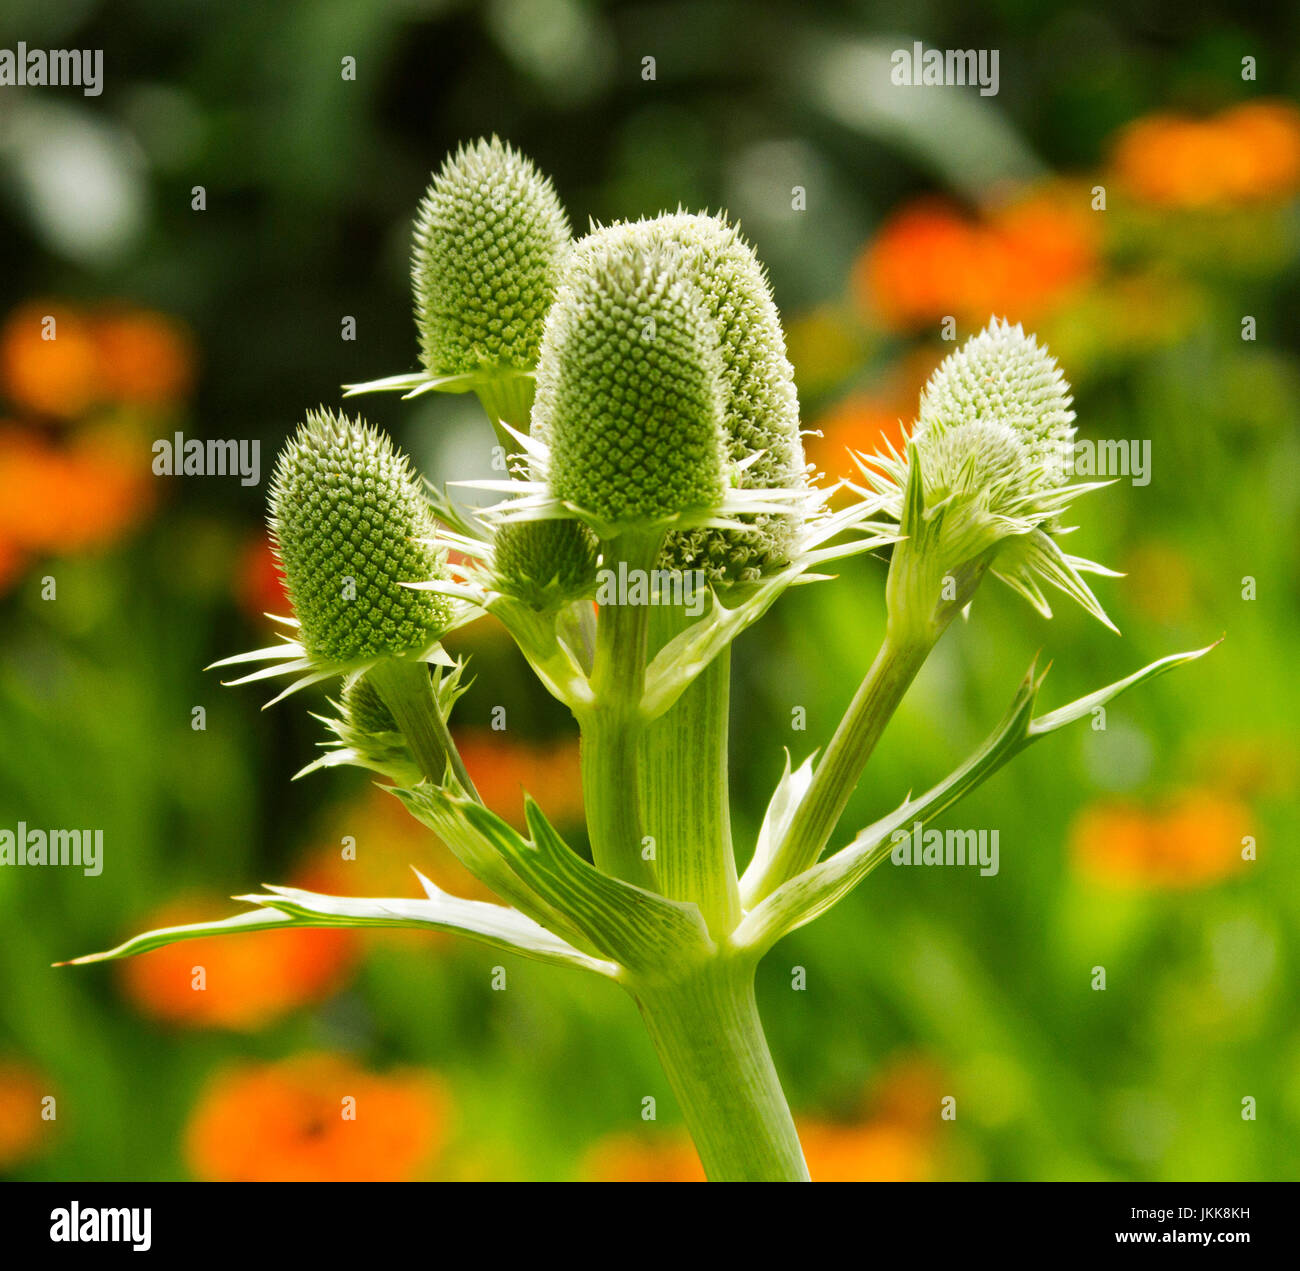 Cluster of cone-shaped green / grey flowers of Eryngium agavifolium, agave-leafed sea holly Stock Photo